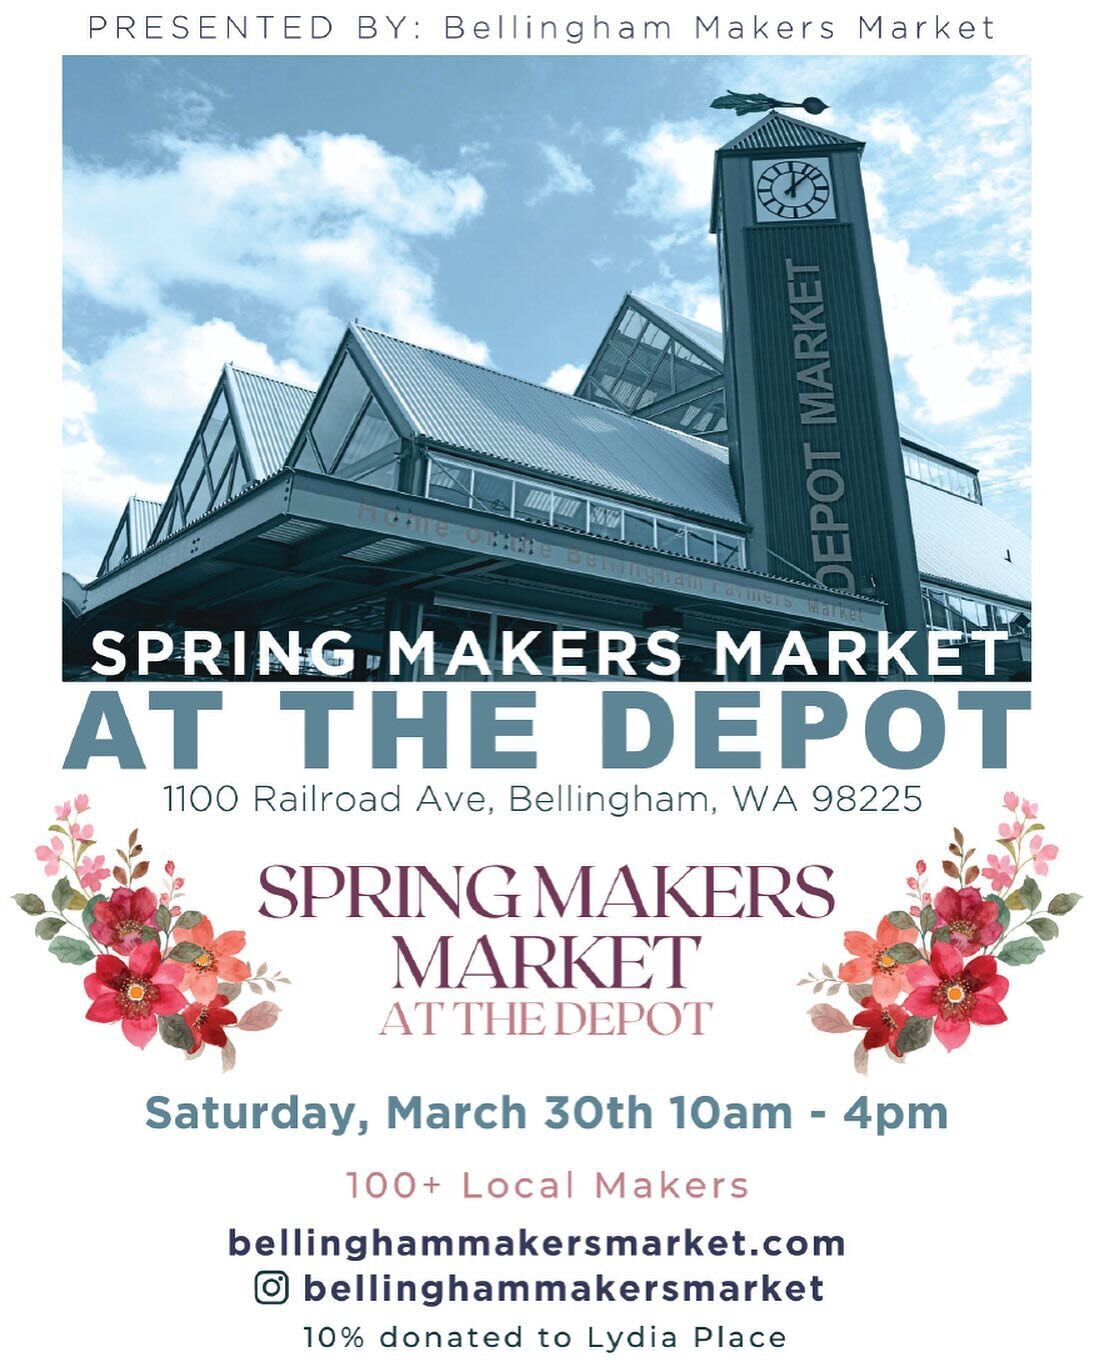 It&rsquo;s just two weeks away! The second annual 
Spring Makers Market at the Depot
hosted by @BellinghamMakersMarket
is happening on March 30th from 10-4. 
Come on out to shop 100 handmade makers!

#springmarket #BellinghamMakersMarket #bhammm